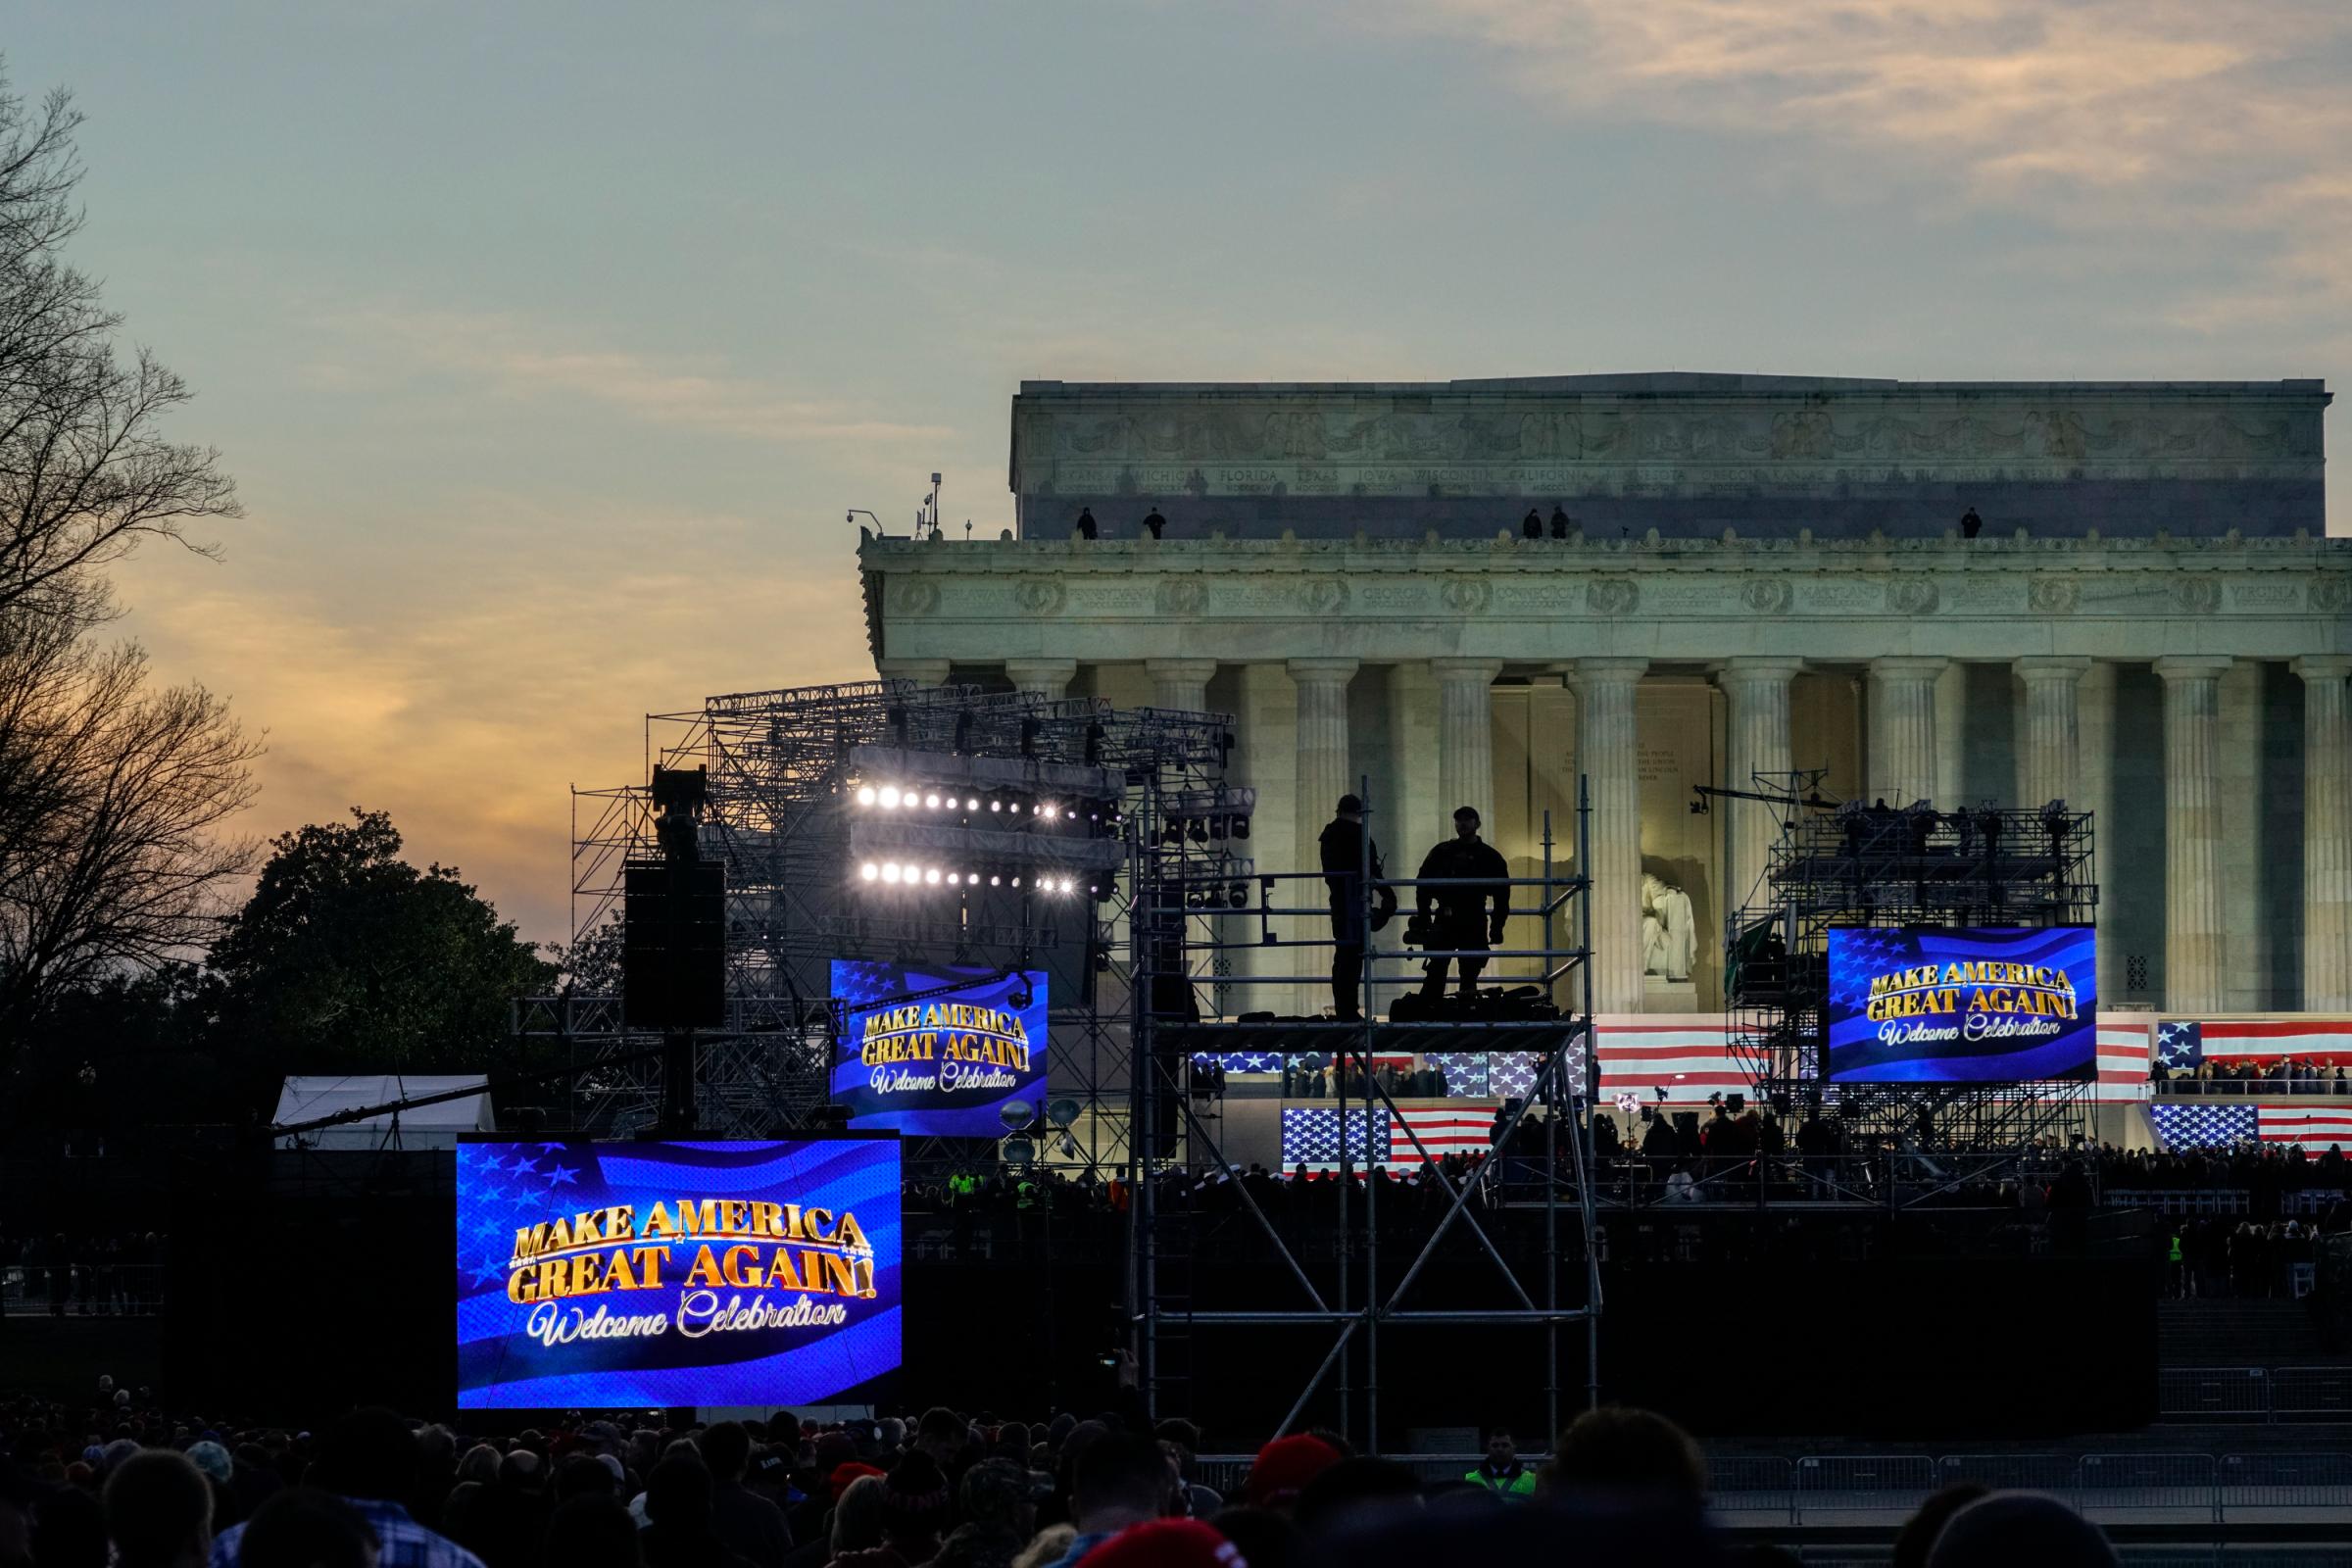 A view of the setup at the "Voices of the People: Make America Great Again Welcome Concert" in front of the Lincoln Memorial on Jan. 19, 2017.